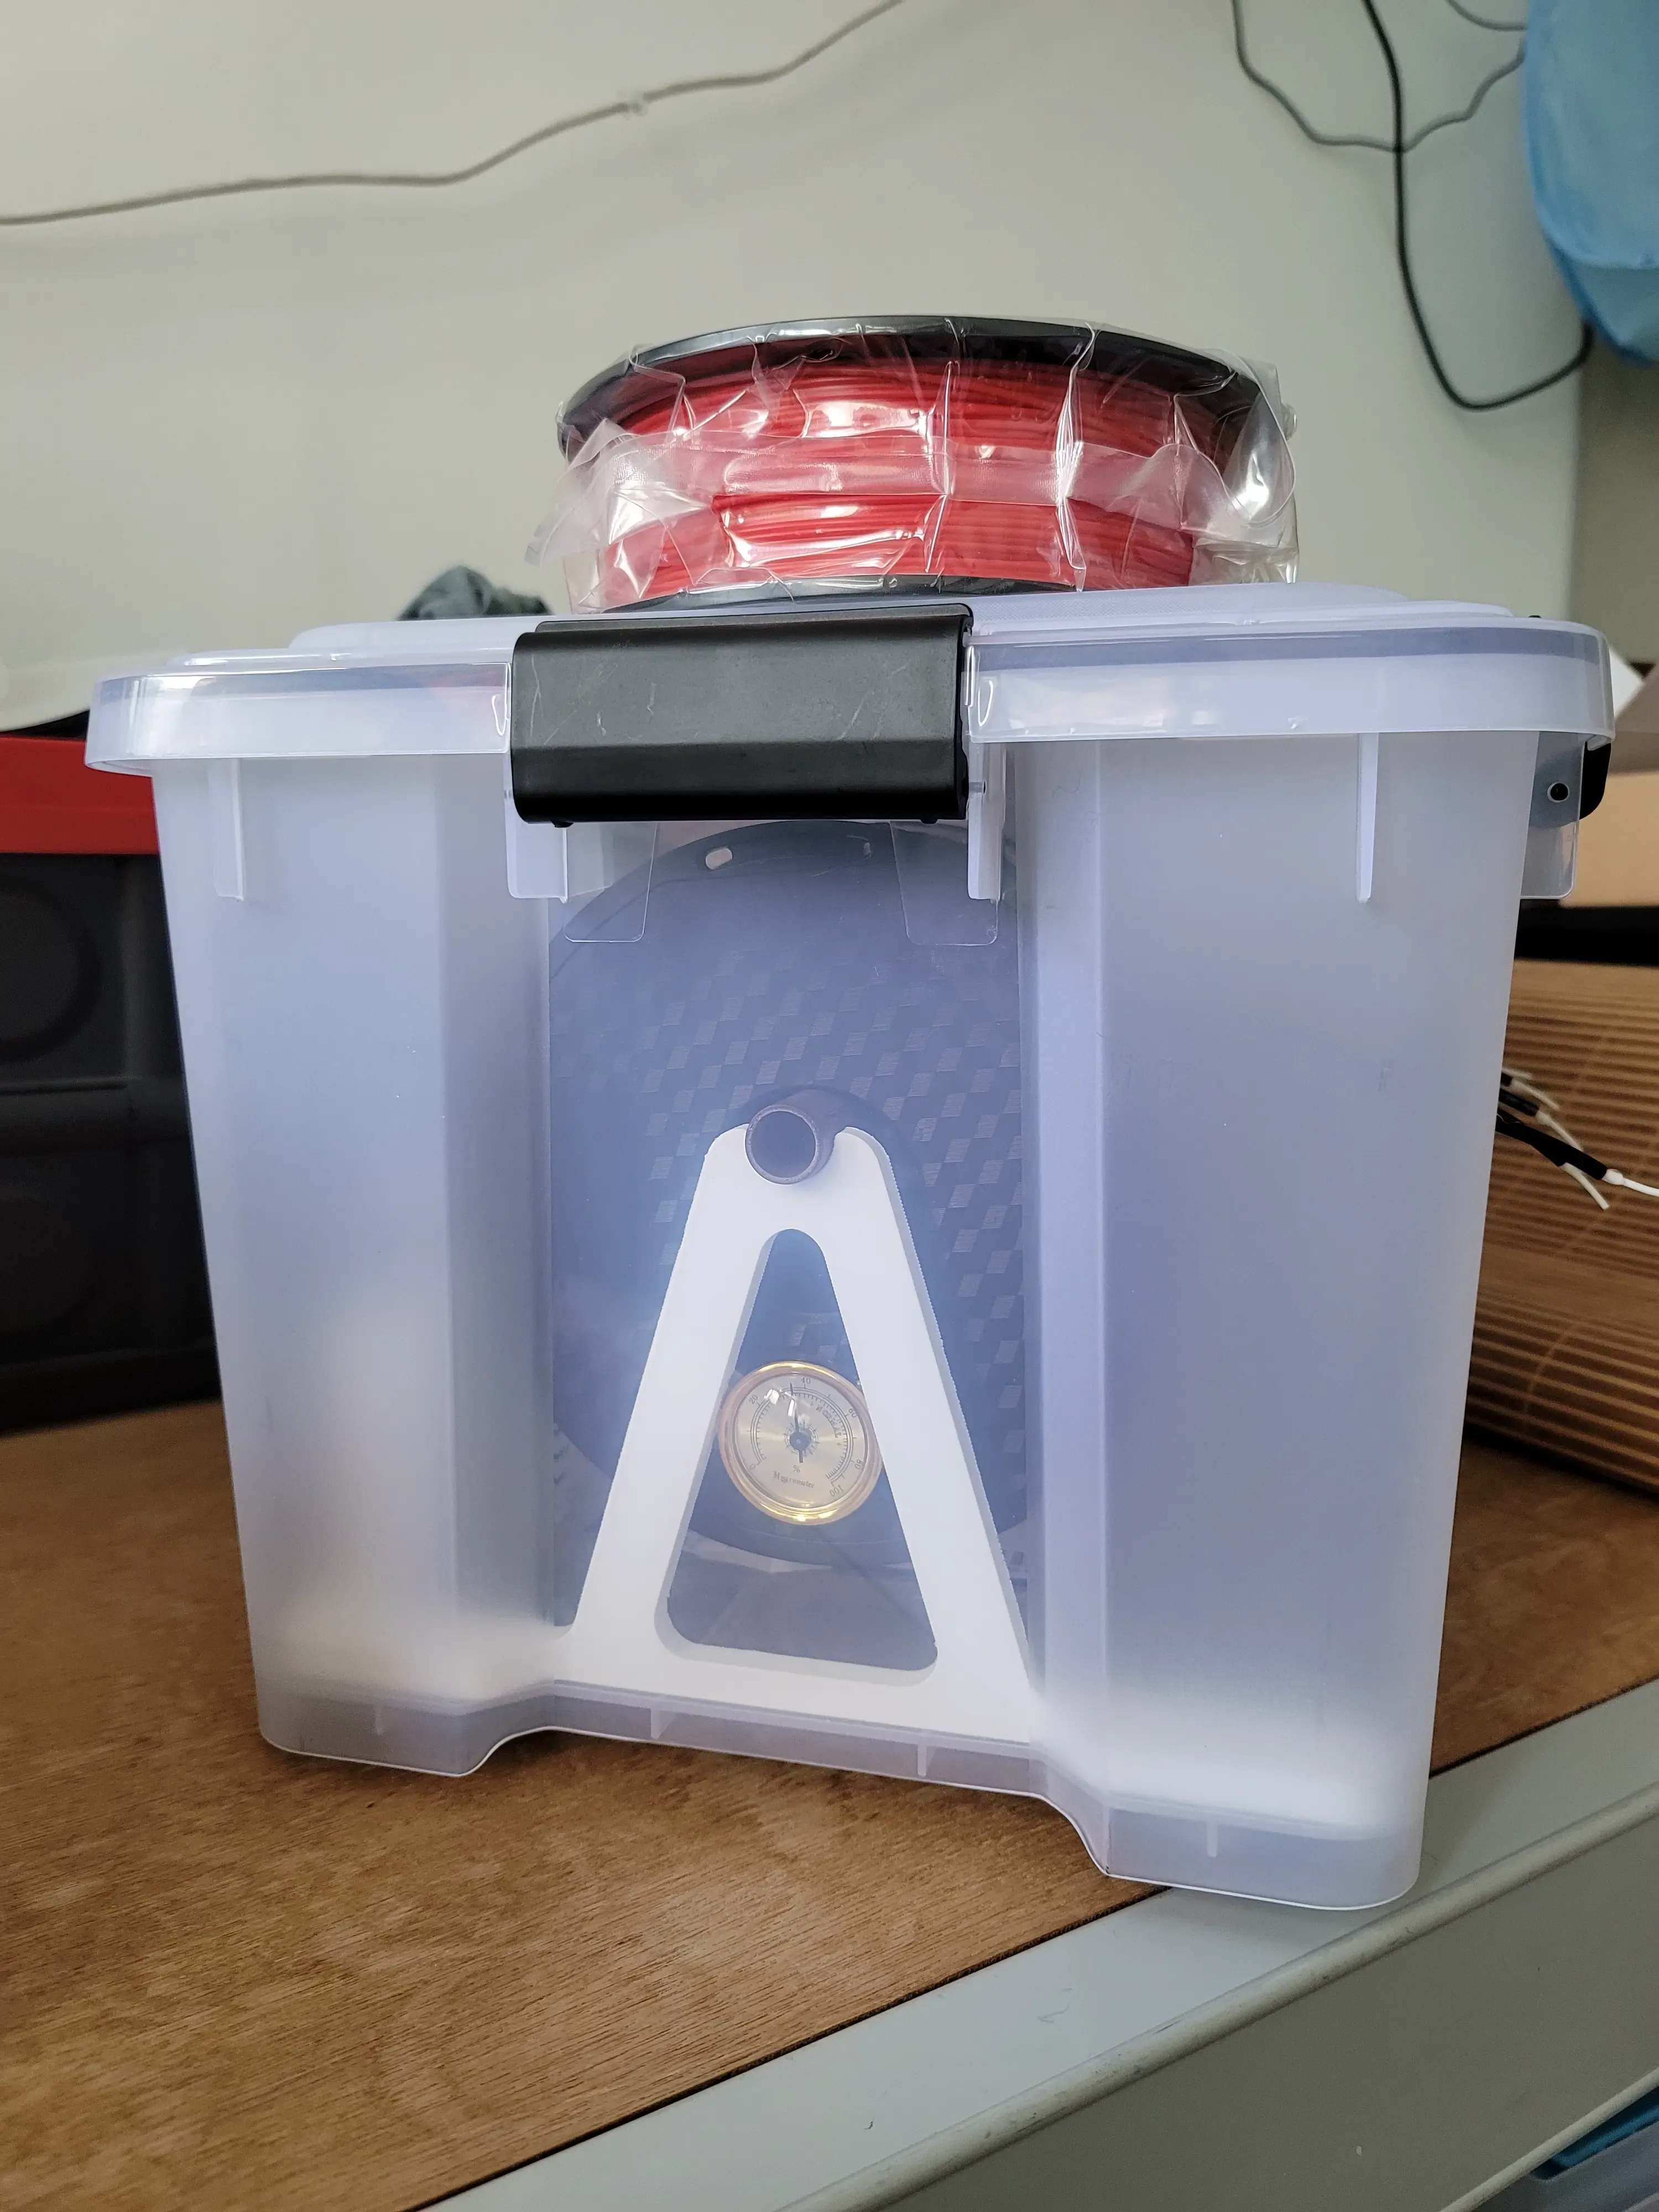 Filament dry box for KT-35